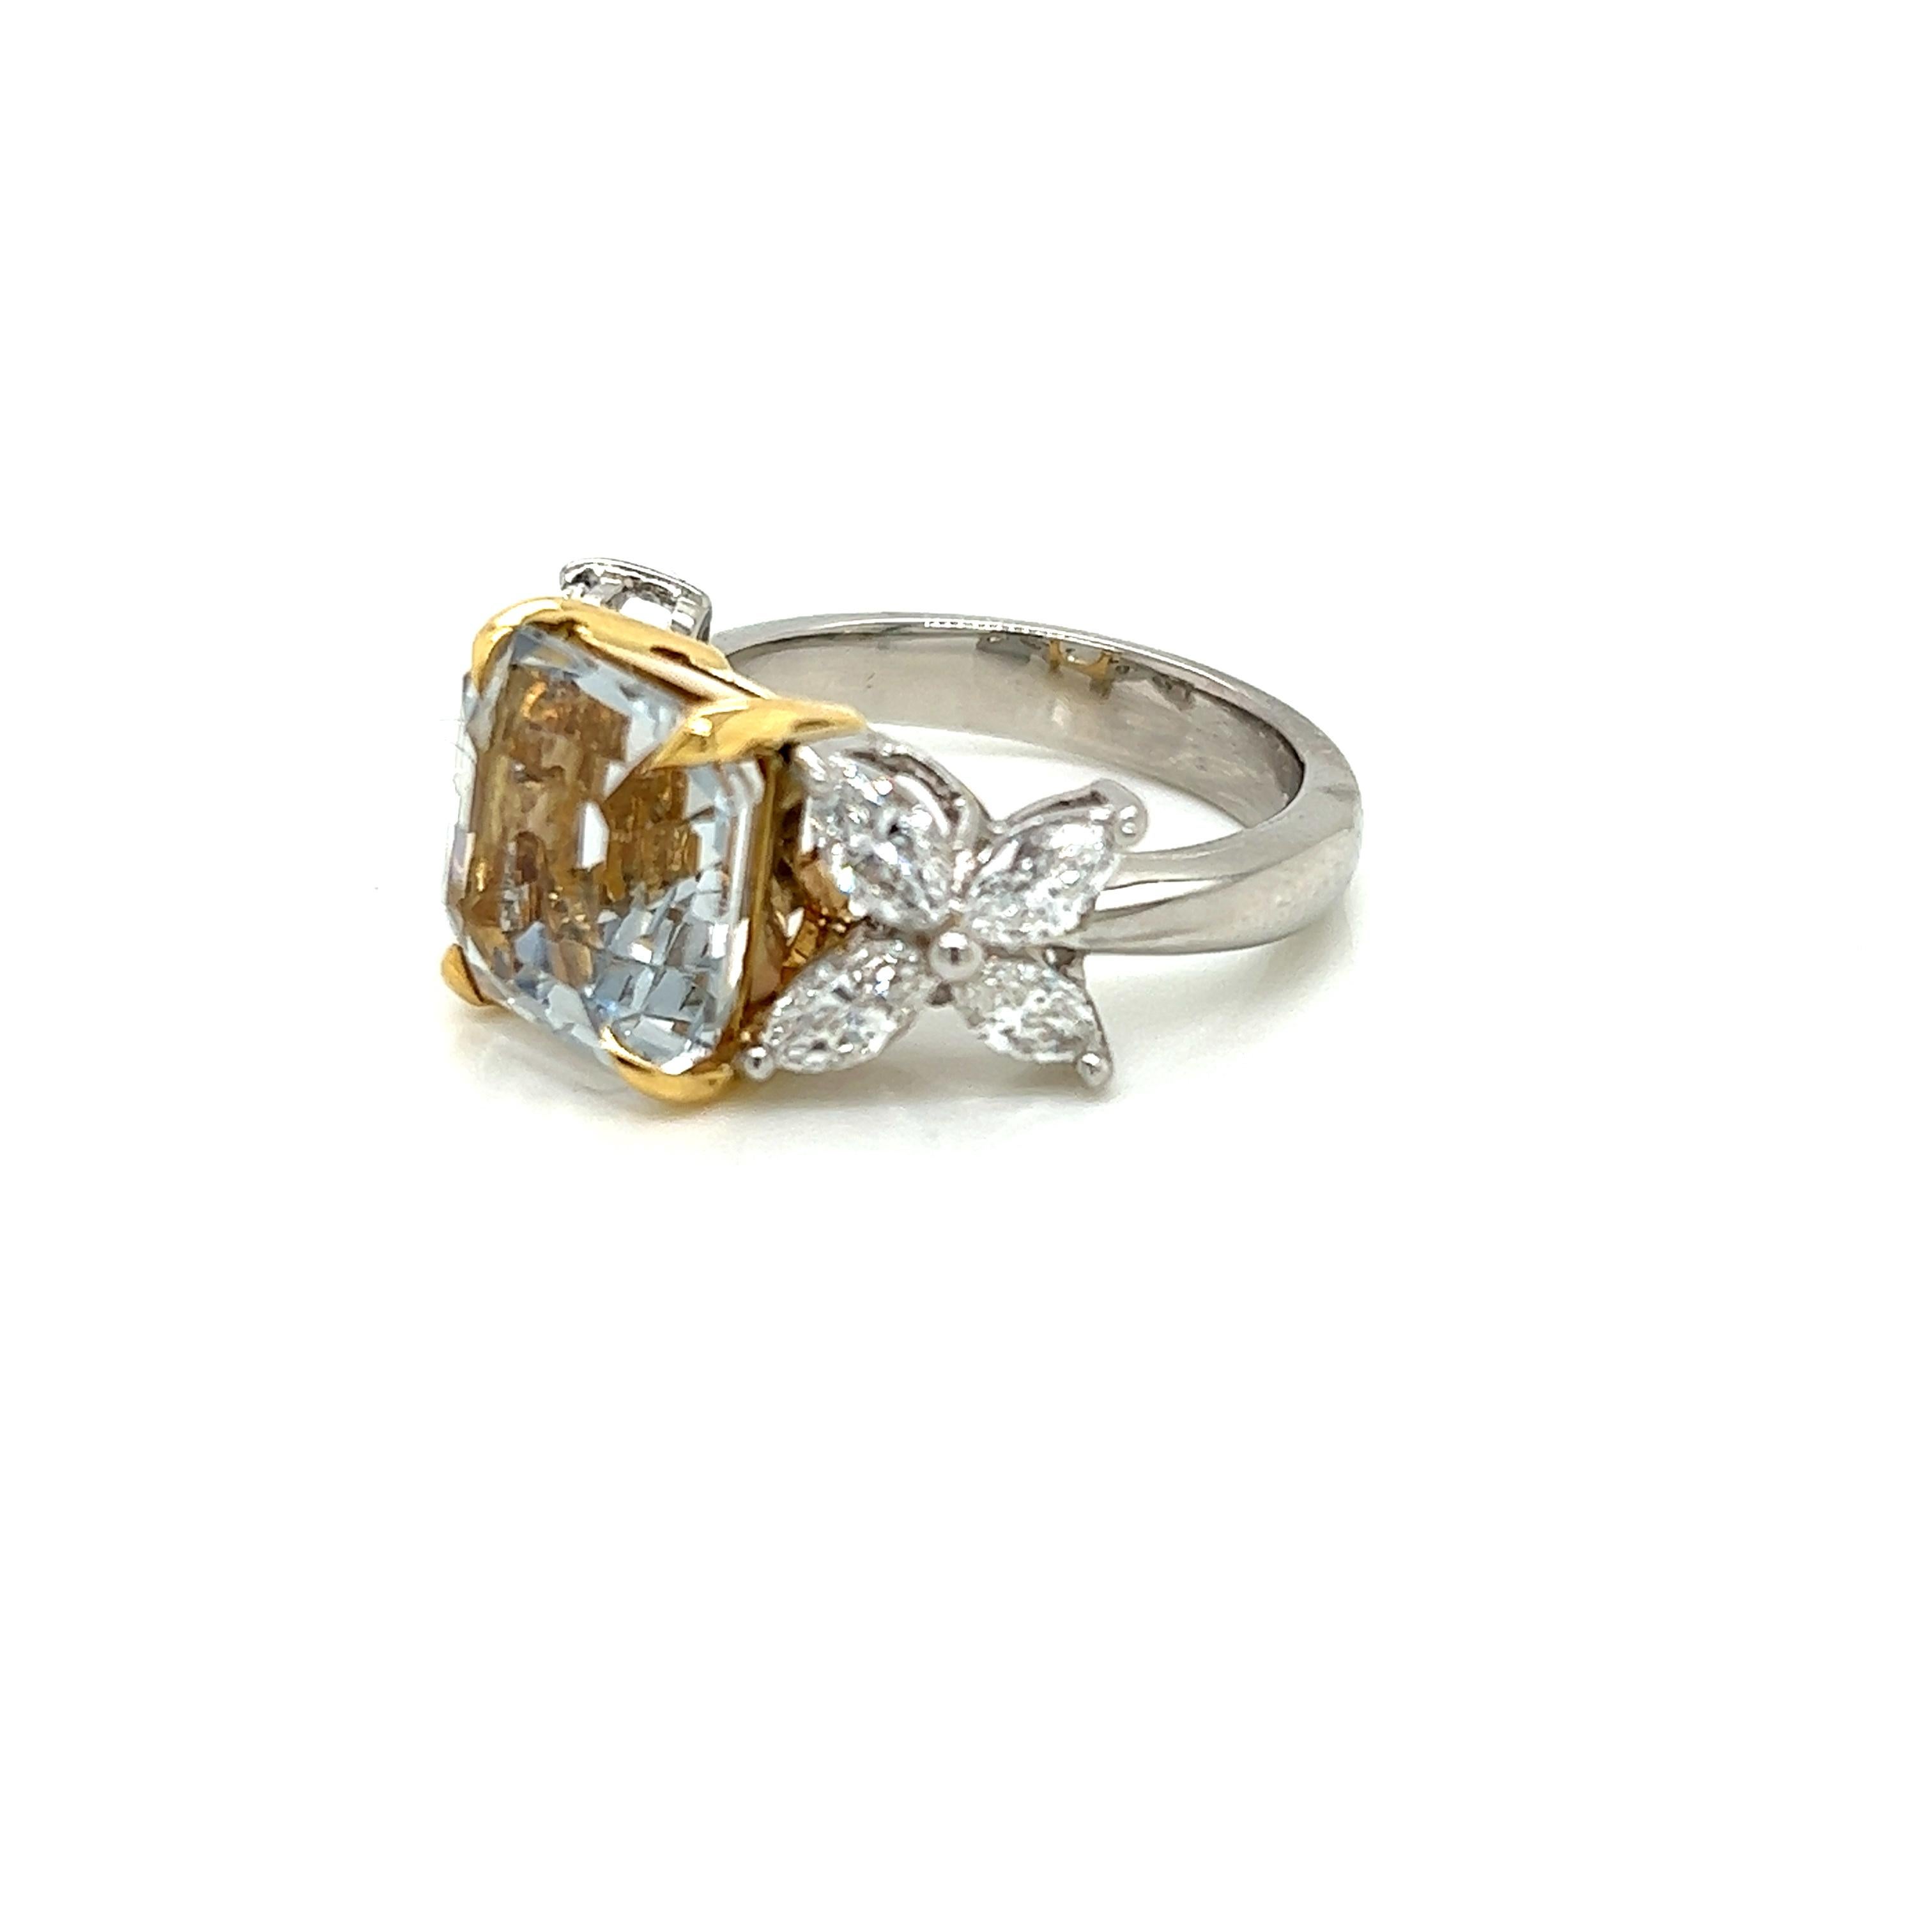 This magnificent Platinum ring features an alluring 5.53 carat Aquamarine set in 18K Yellow Gold at its centre. On either side of it, arranged like dainty, iridescent petals on a flower, are 4 marquise cut Diamonds.

The pristine square-step cut